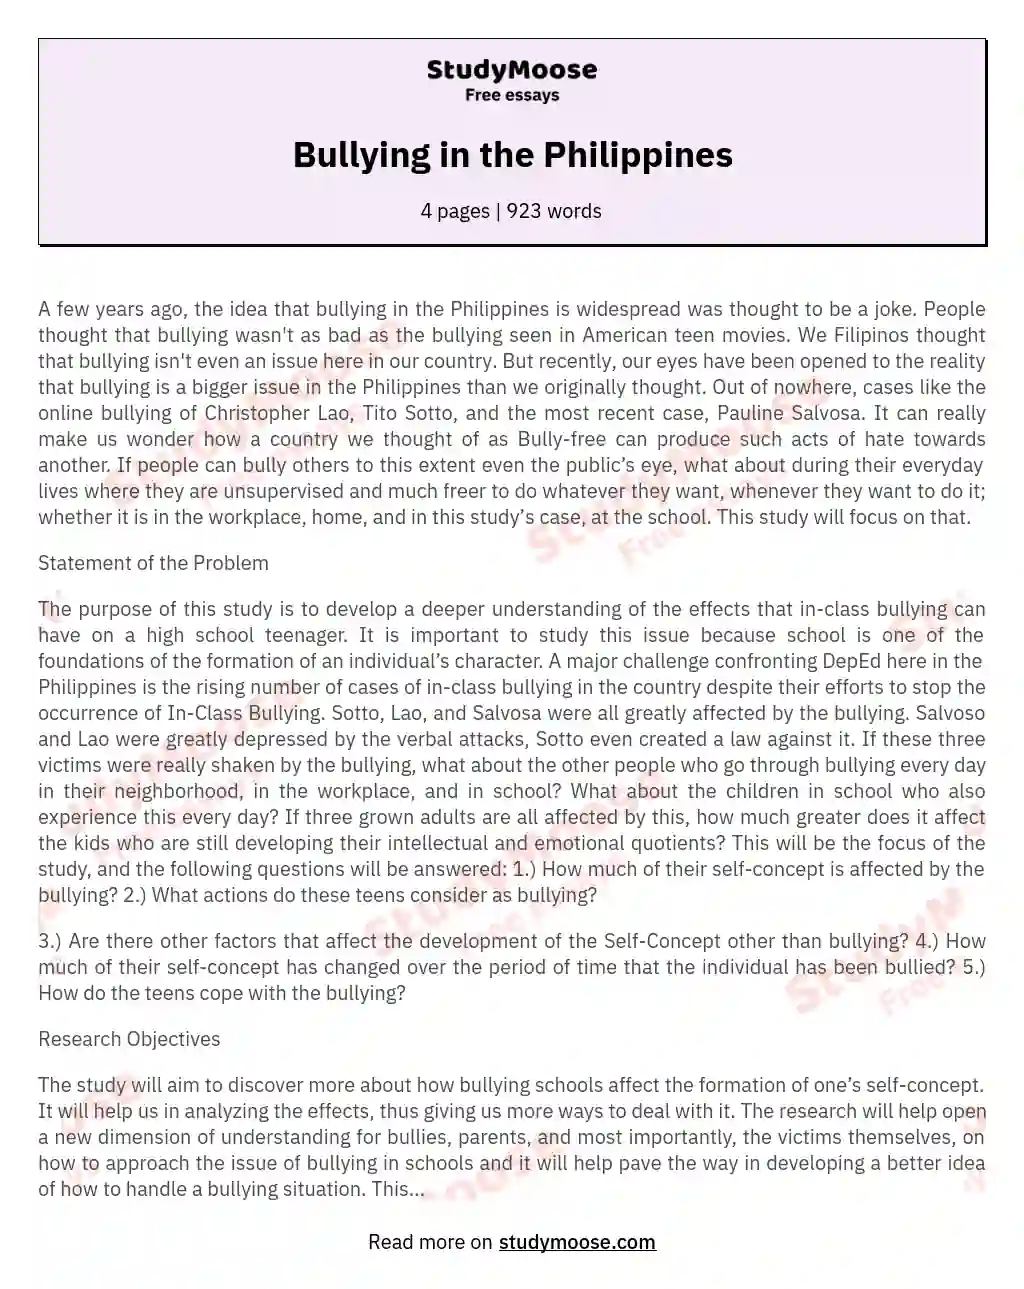 Bullying in the Philippines essay